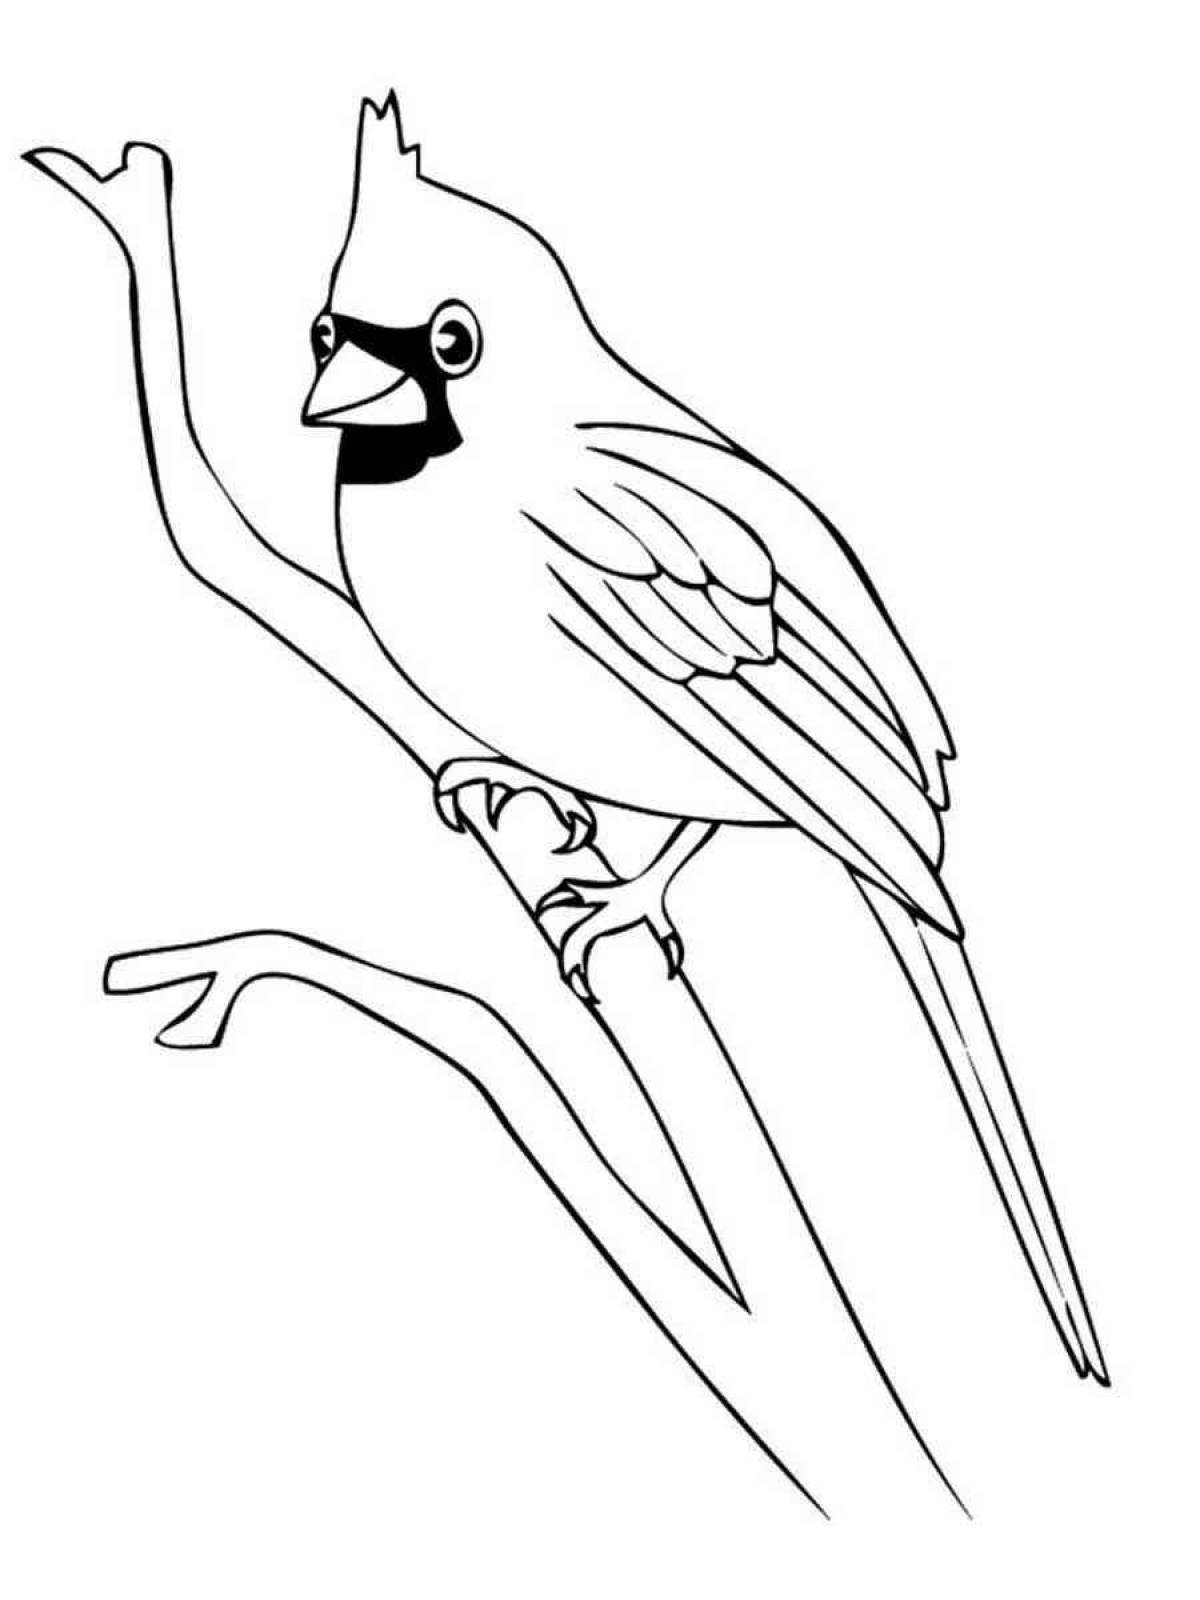 Joyful waxwing coloring page for kids